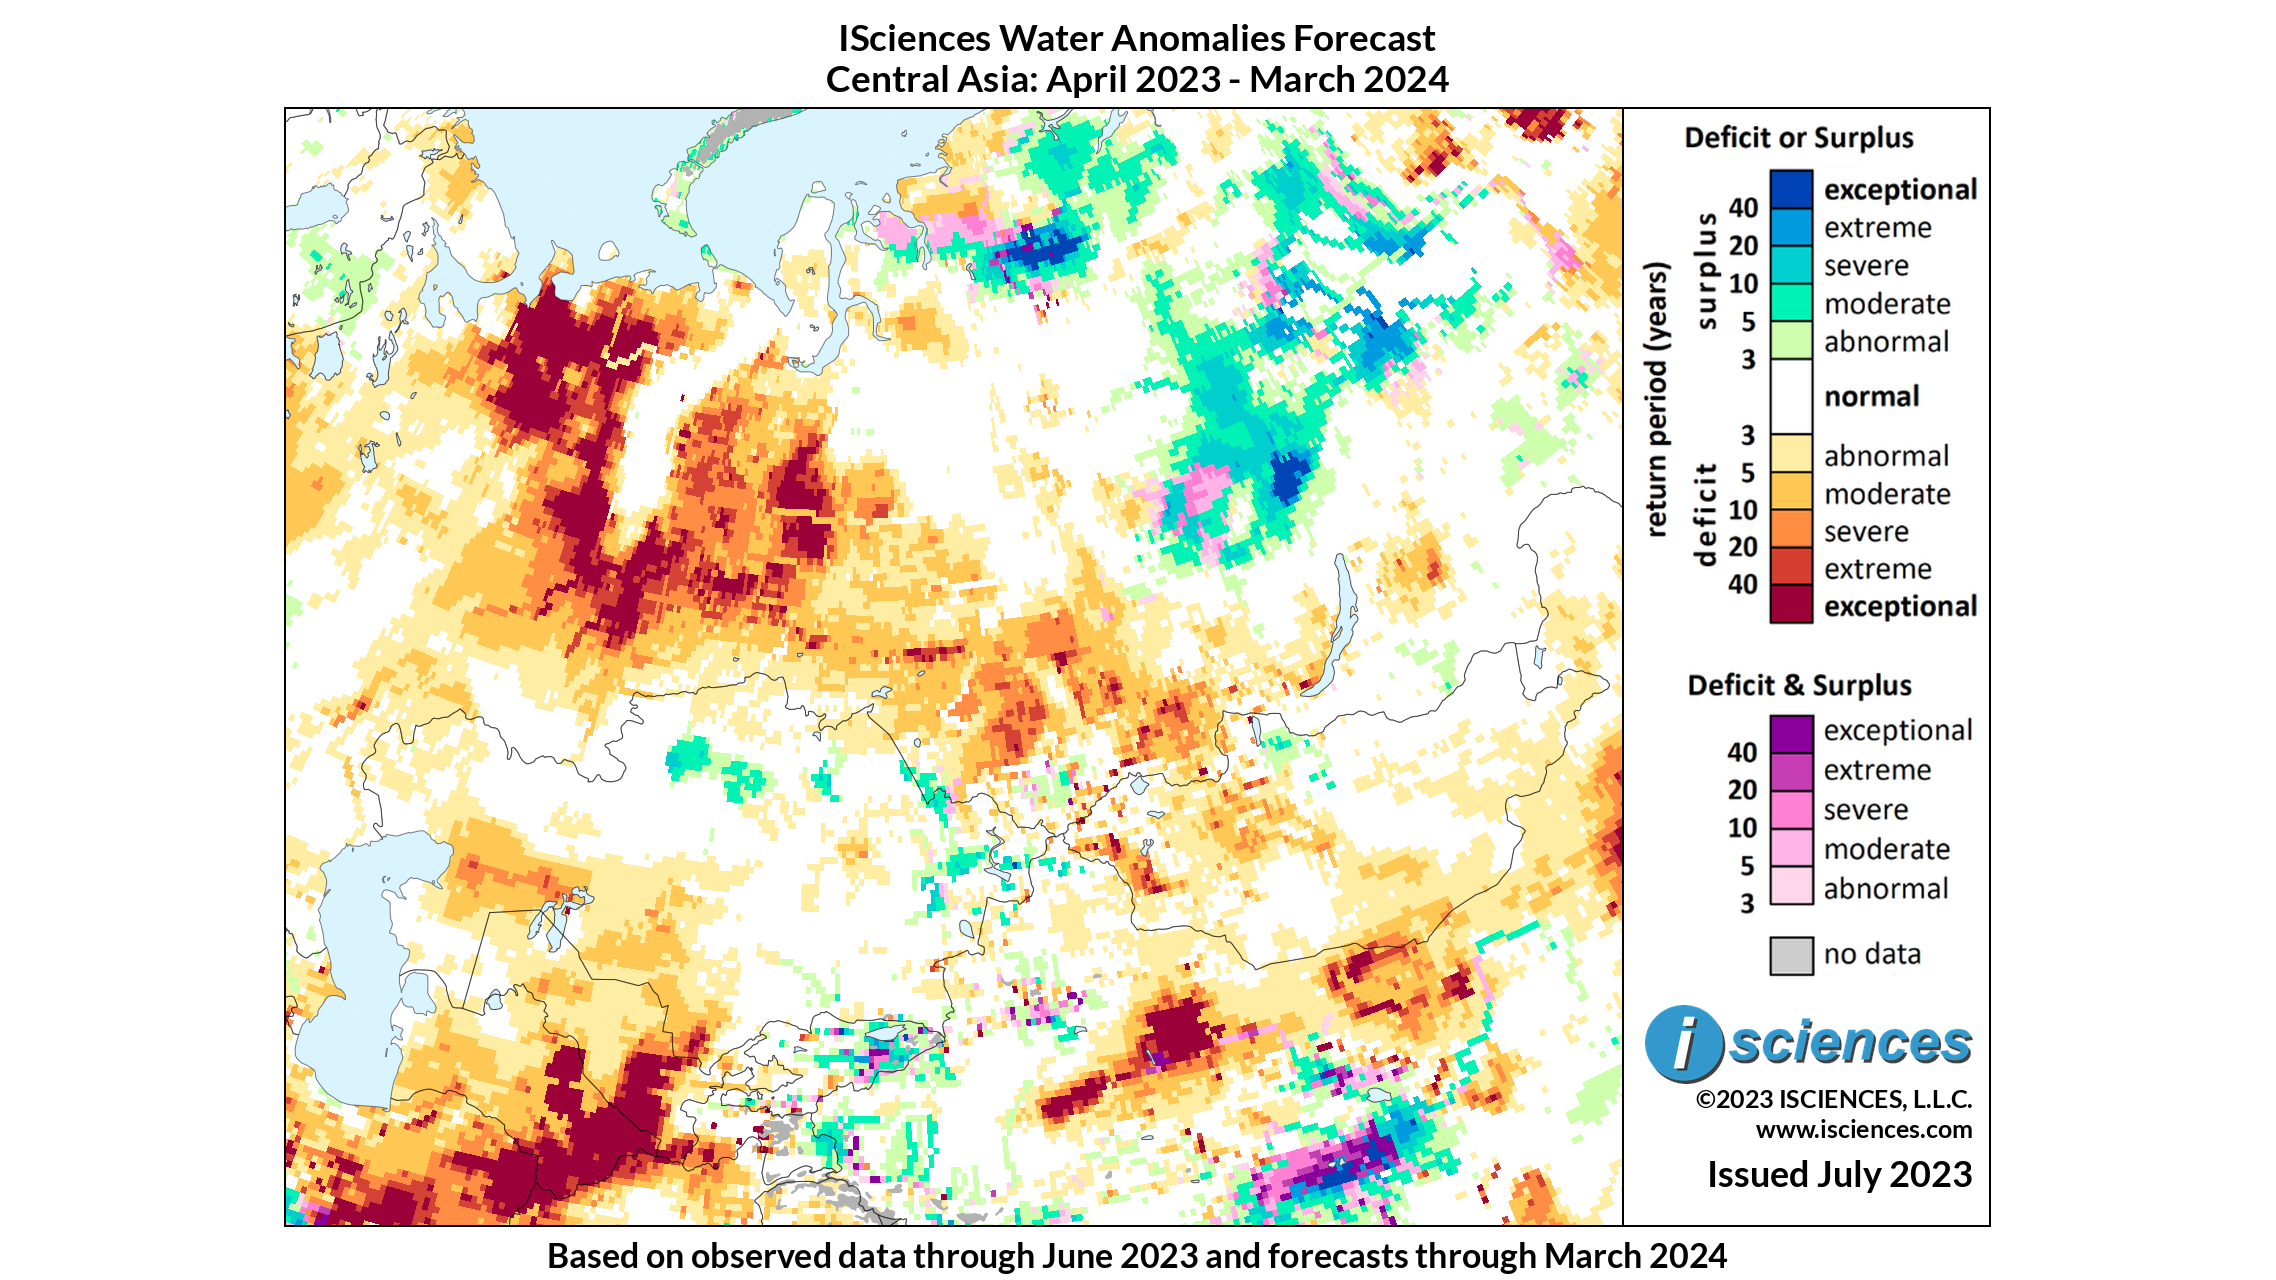 Photo: map showing the forecasted water deficits for Uzbekistan and Western Russia